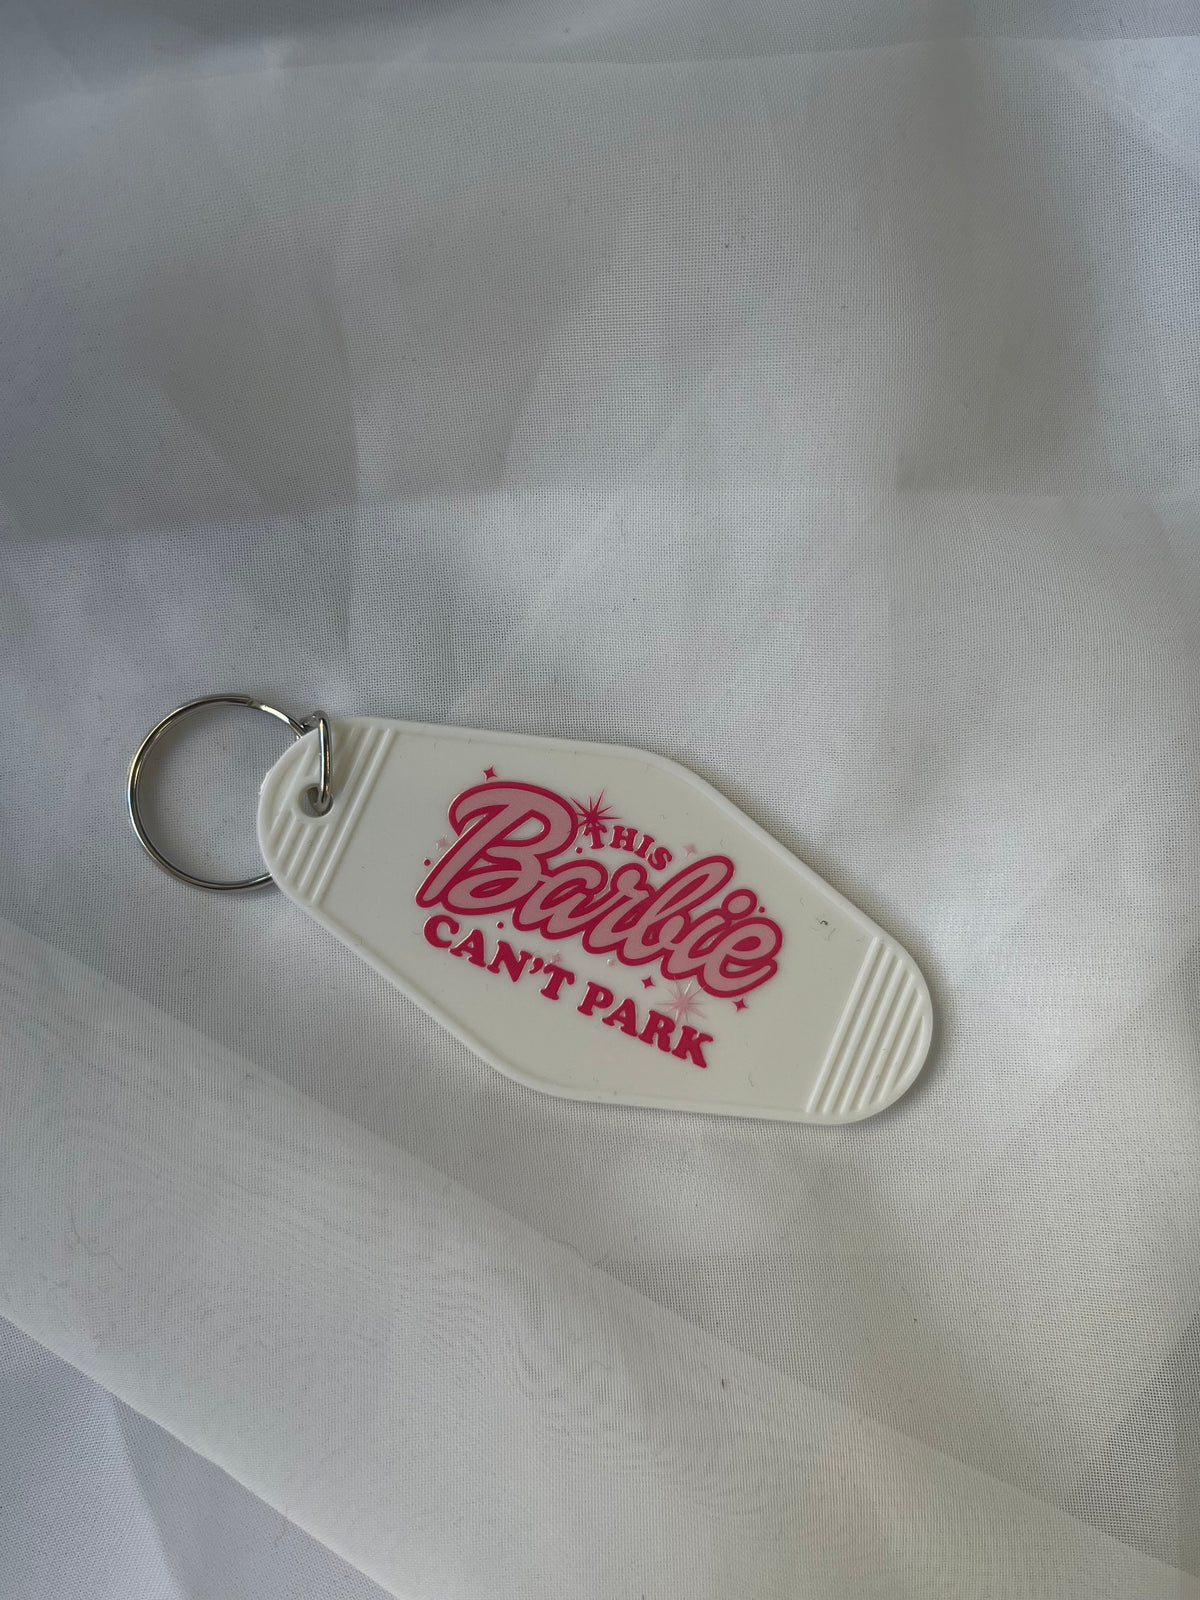 This Barbie Can't Park Motel Keychain